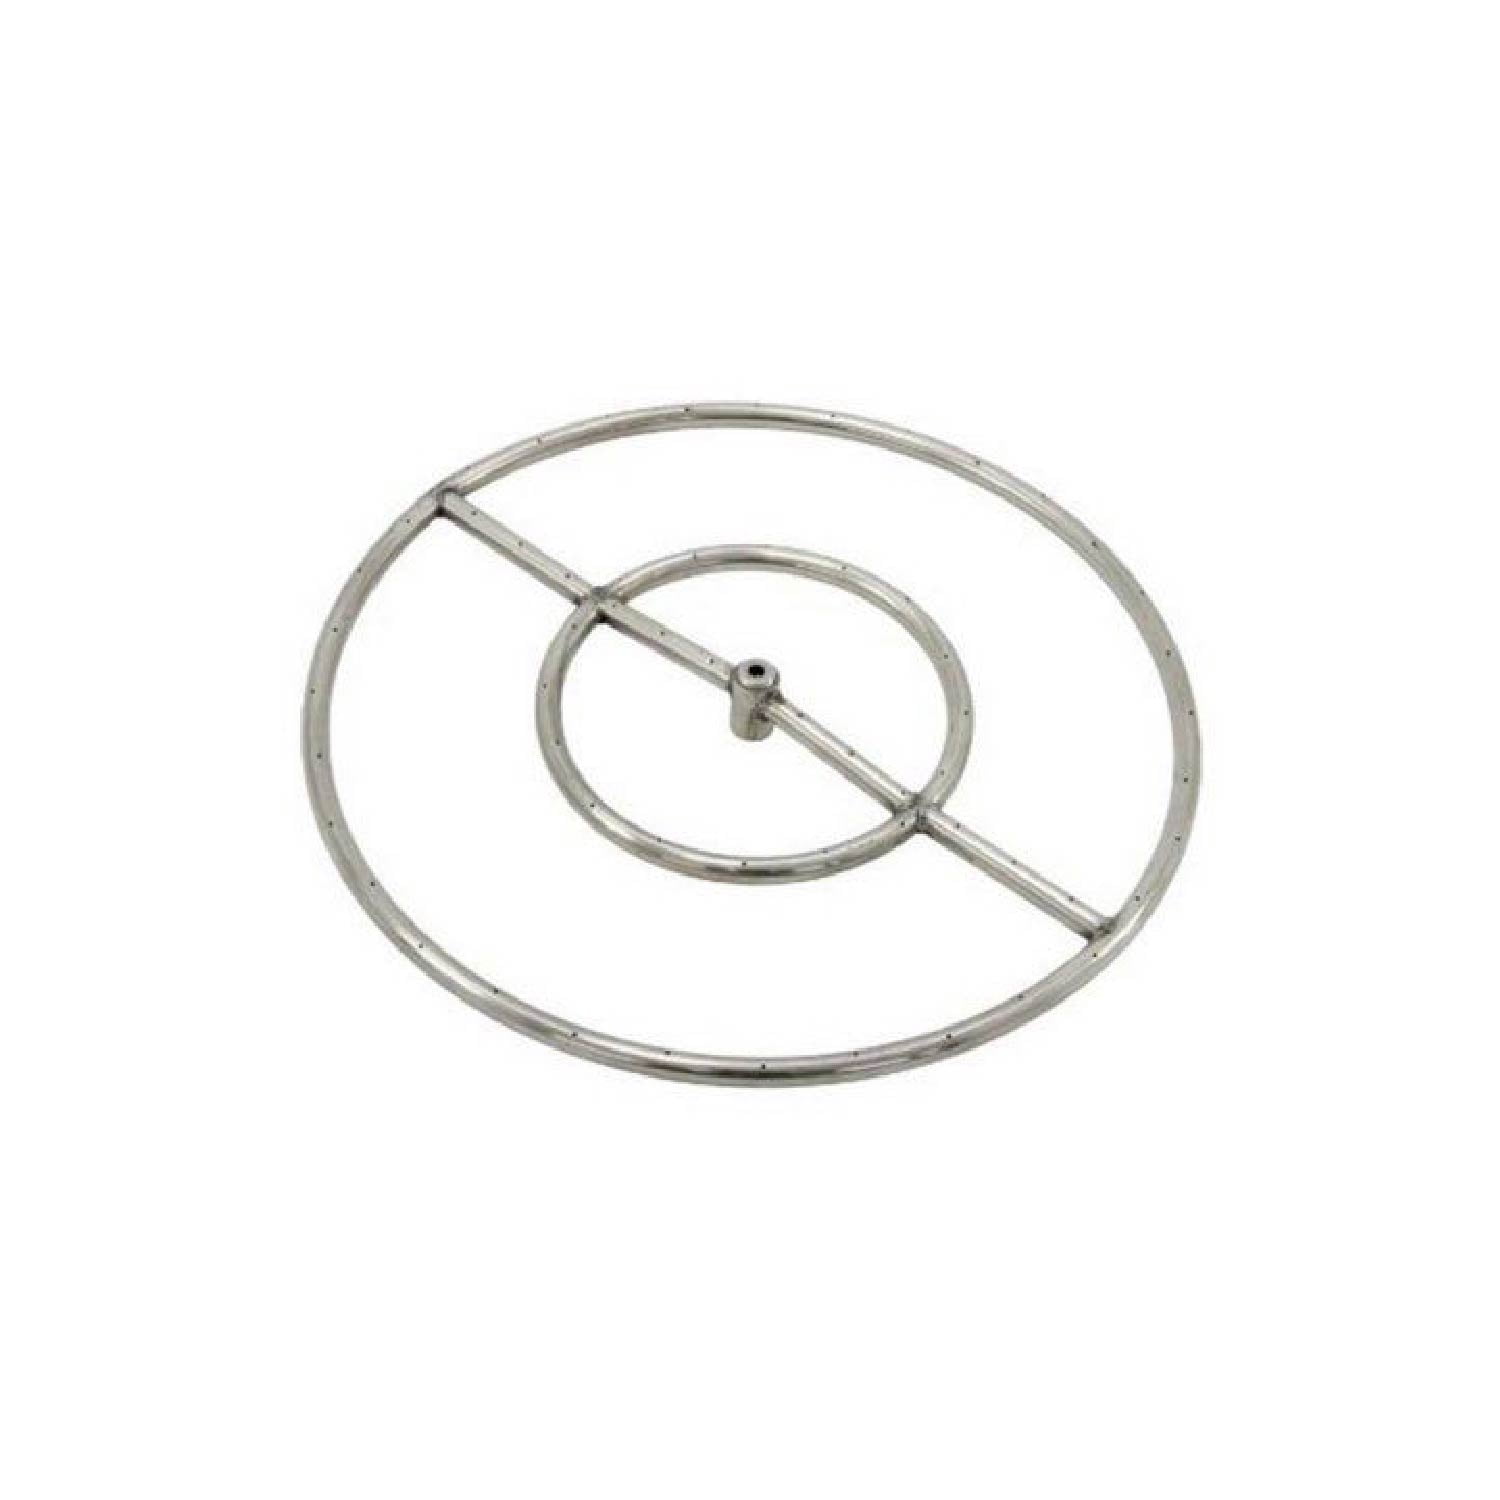 Rasmussen Fire Pit Burner Ring, 36 Stainless Steel Fire Pit Ring